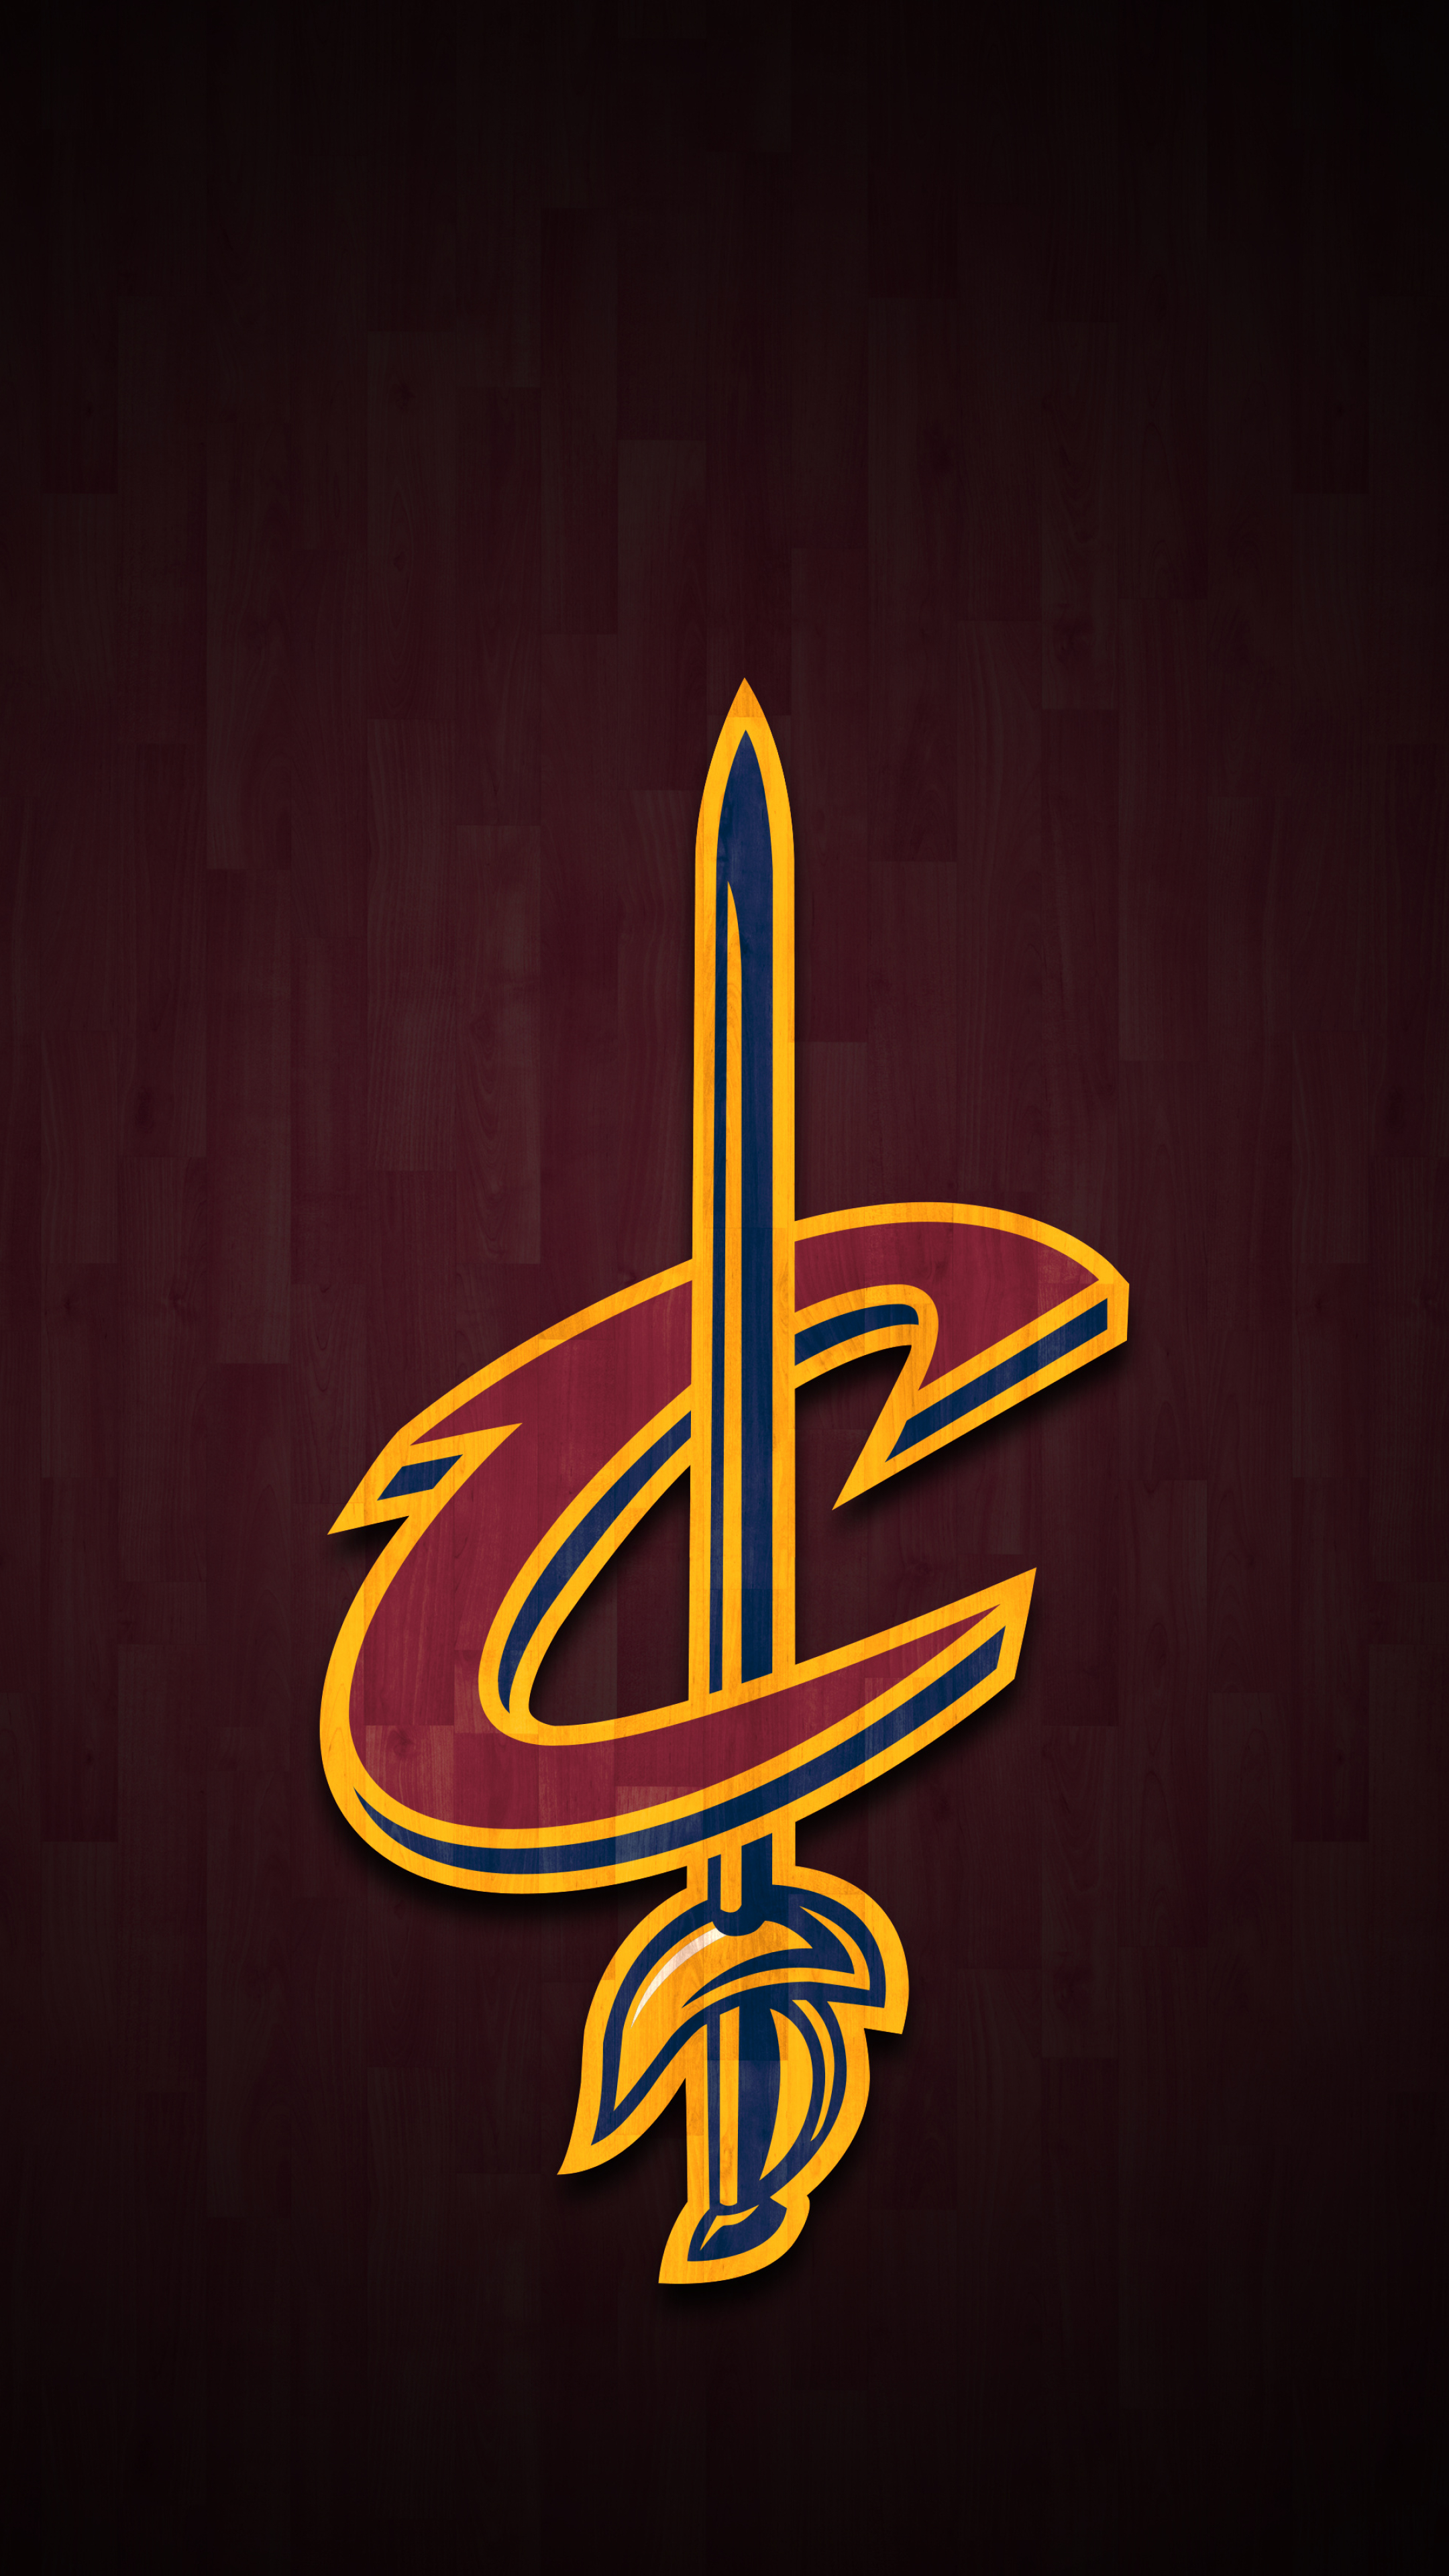 Cleveland Cavaliers, 2022 wallpapers, Pro sports backgrounds, NBA team, 2160x3840 4K Handy